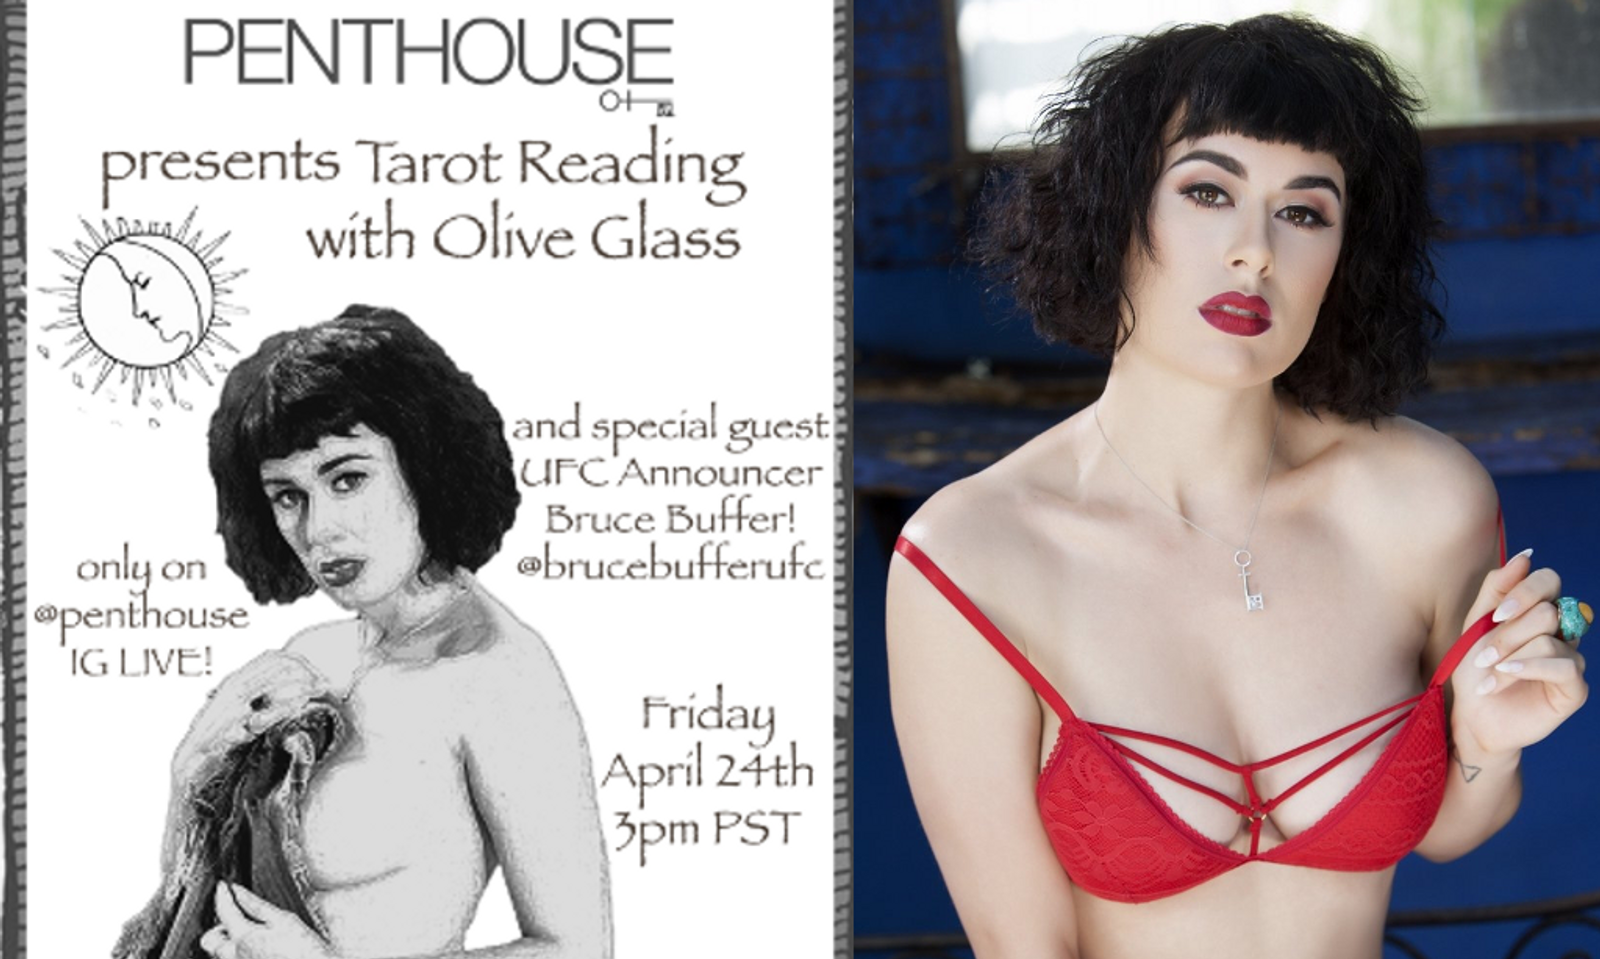 Olive Glass to Do Live Tarot Reading on Penthouse's IG Live